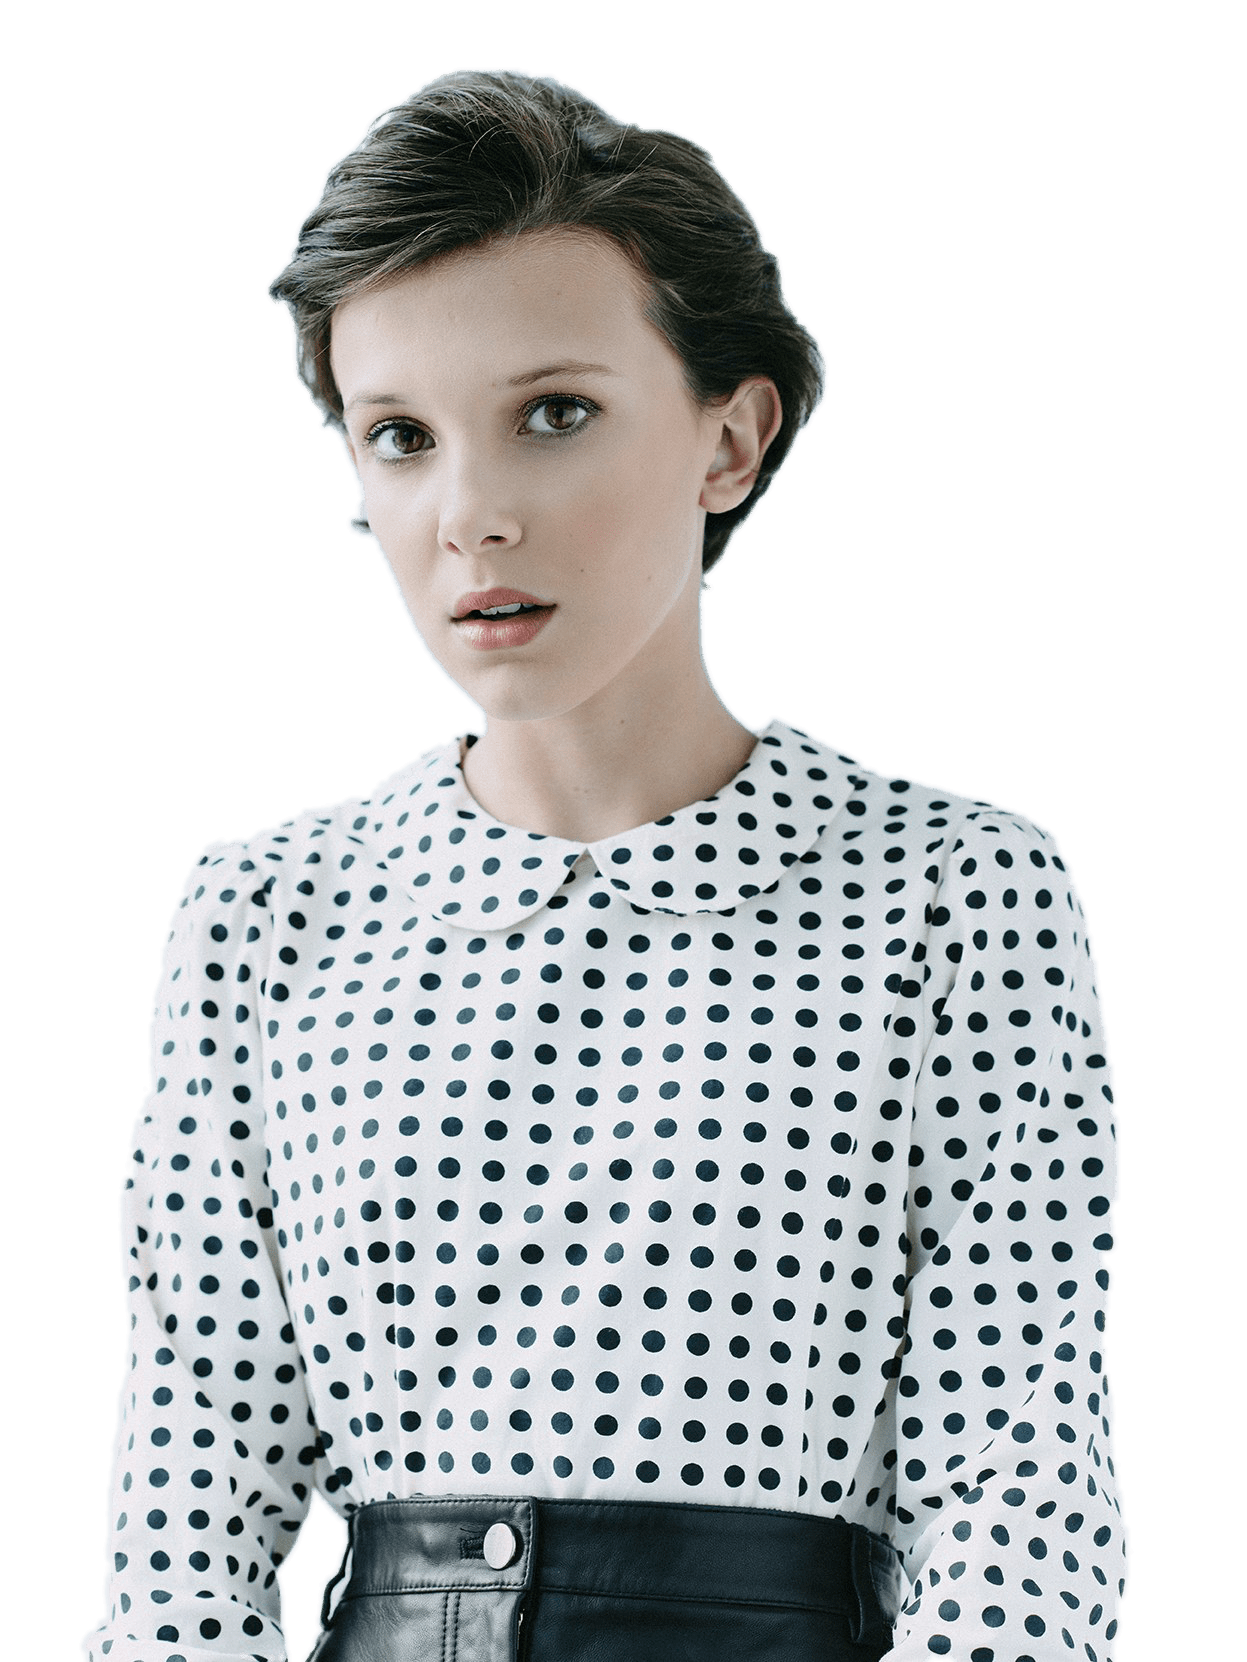 Millie Bobby Brown PNG Download Image